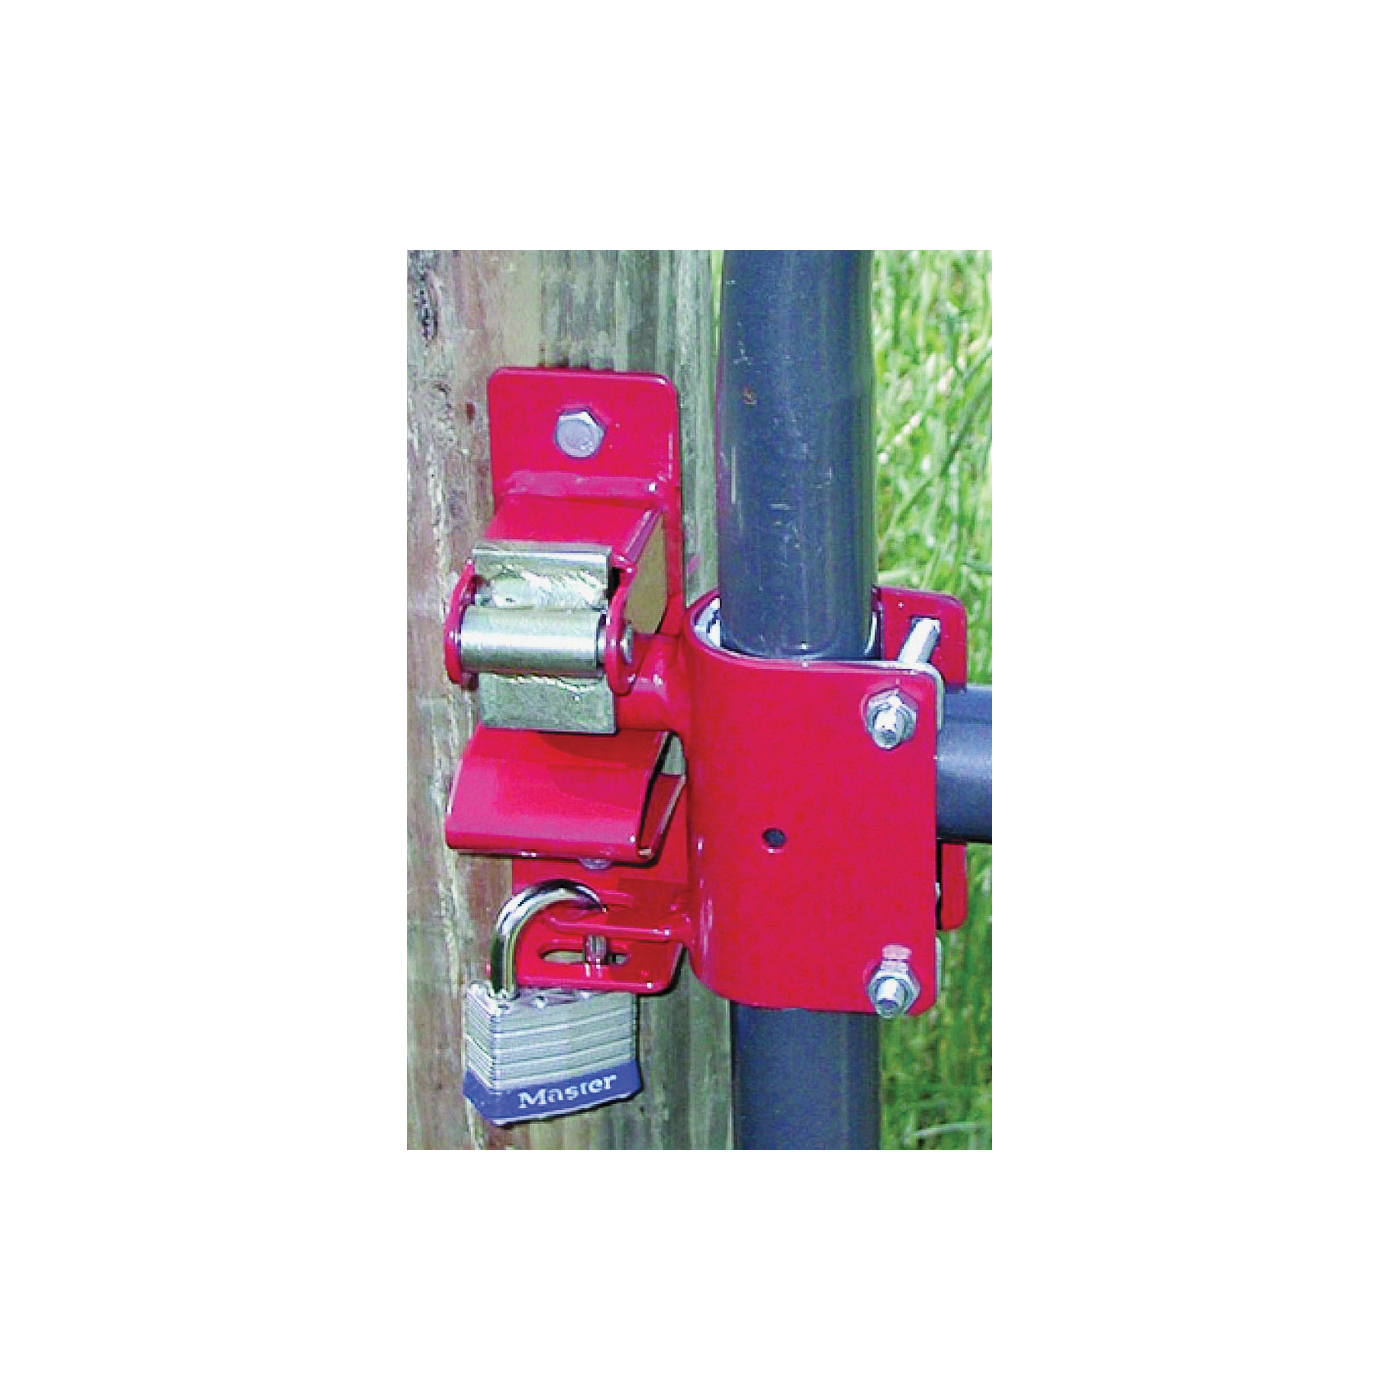 S16100500 Gate Latch, 1-Way, Lockable, Steel, Red, For: 1-5/8 to 2 in OD Round Tube Gate